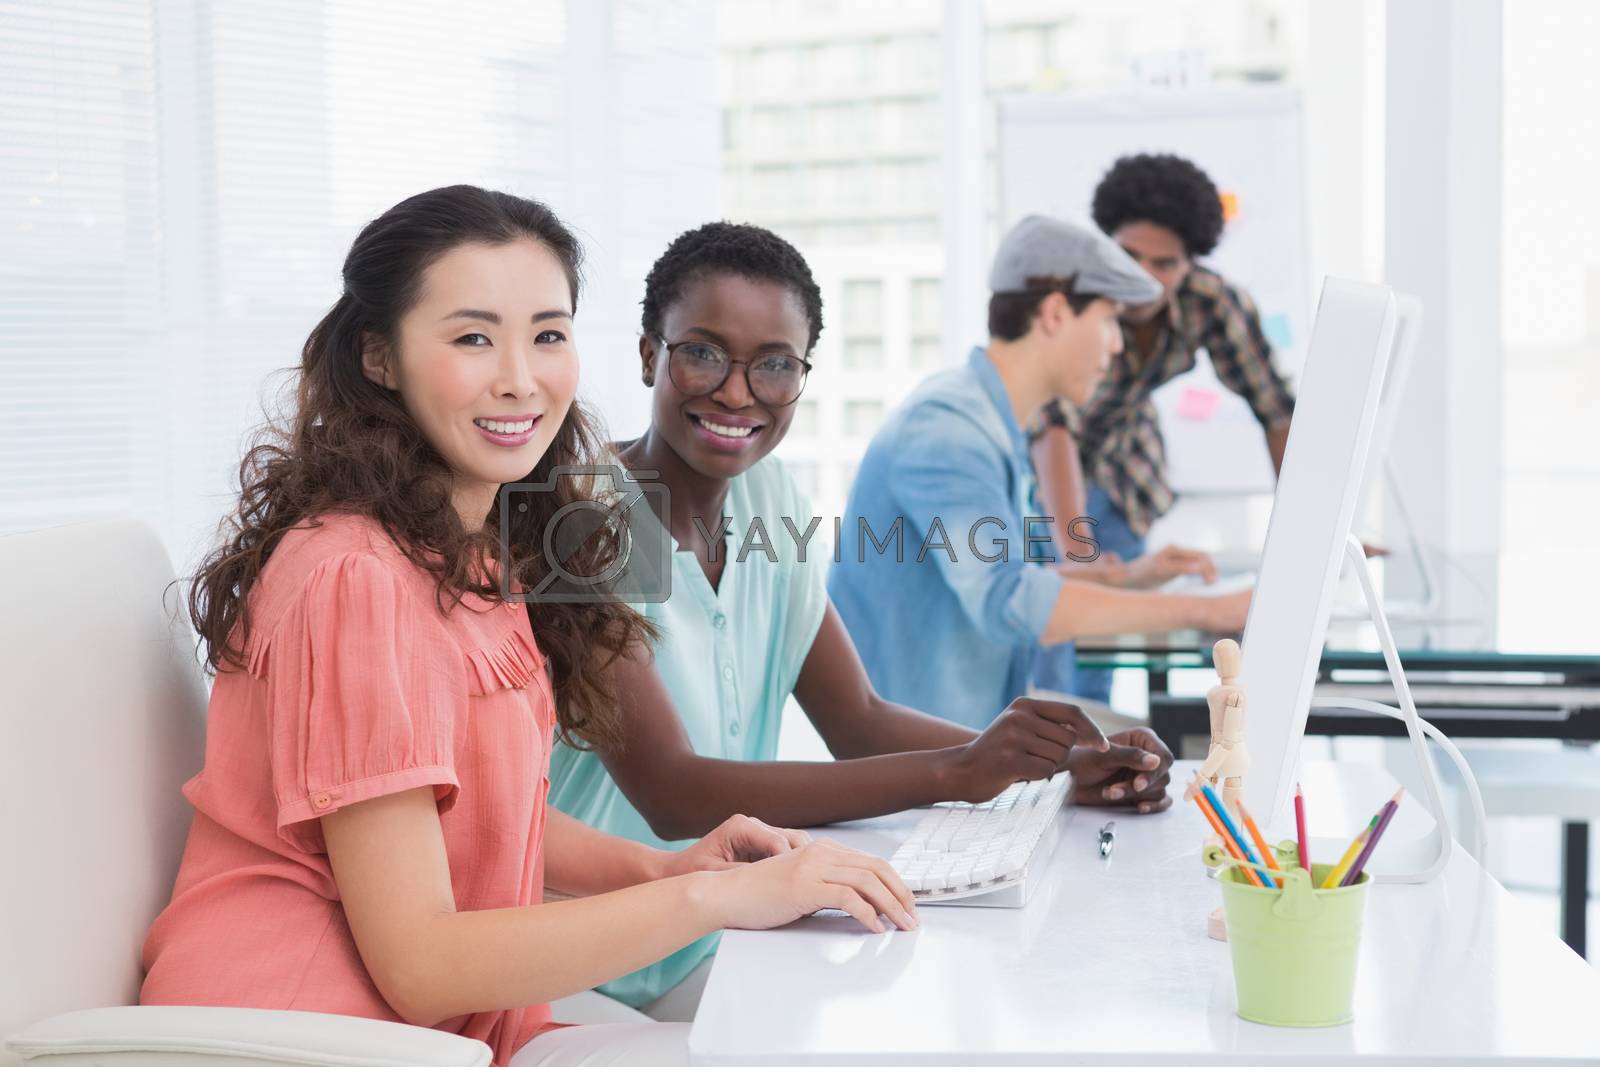 Royalty free image of Young creative team working at desk by Wavebreakmedia